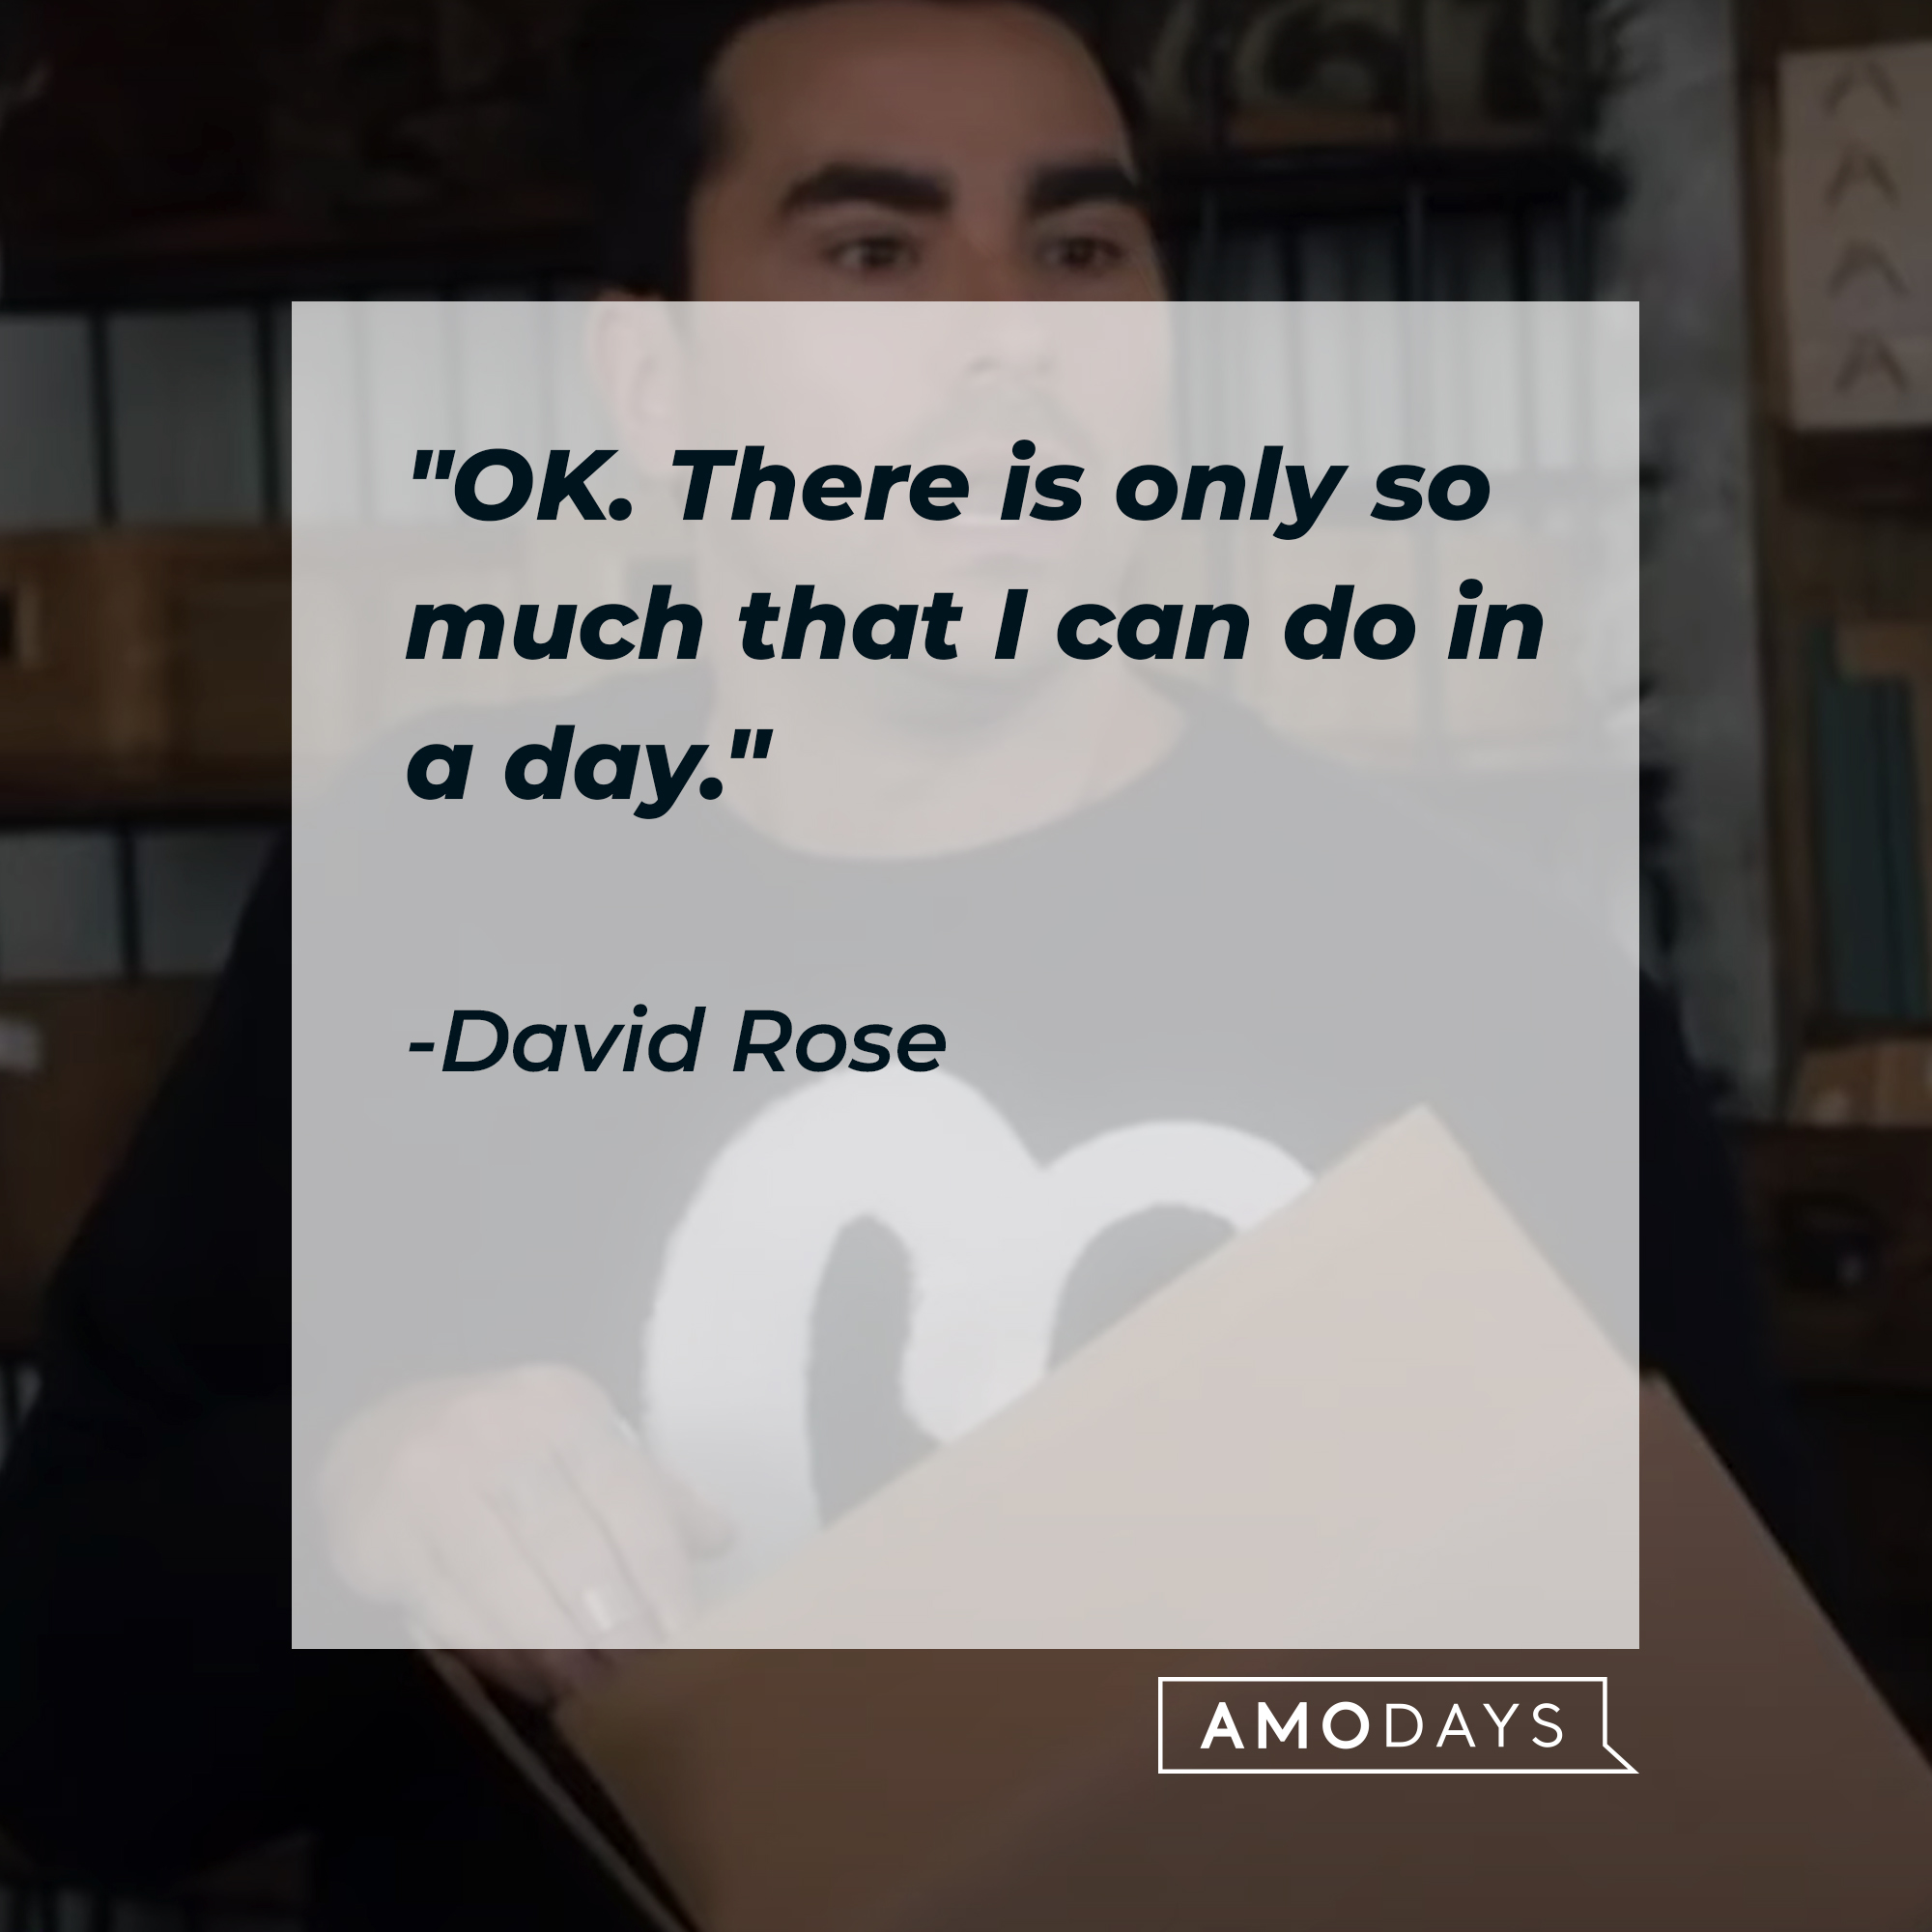 A photo of David Rose with the quote, "OK. There is only so much that I can do in a day." | Source: YouTube/PopTVVideo